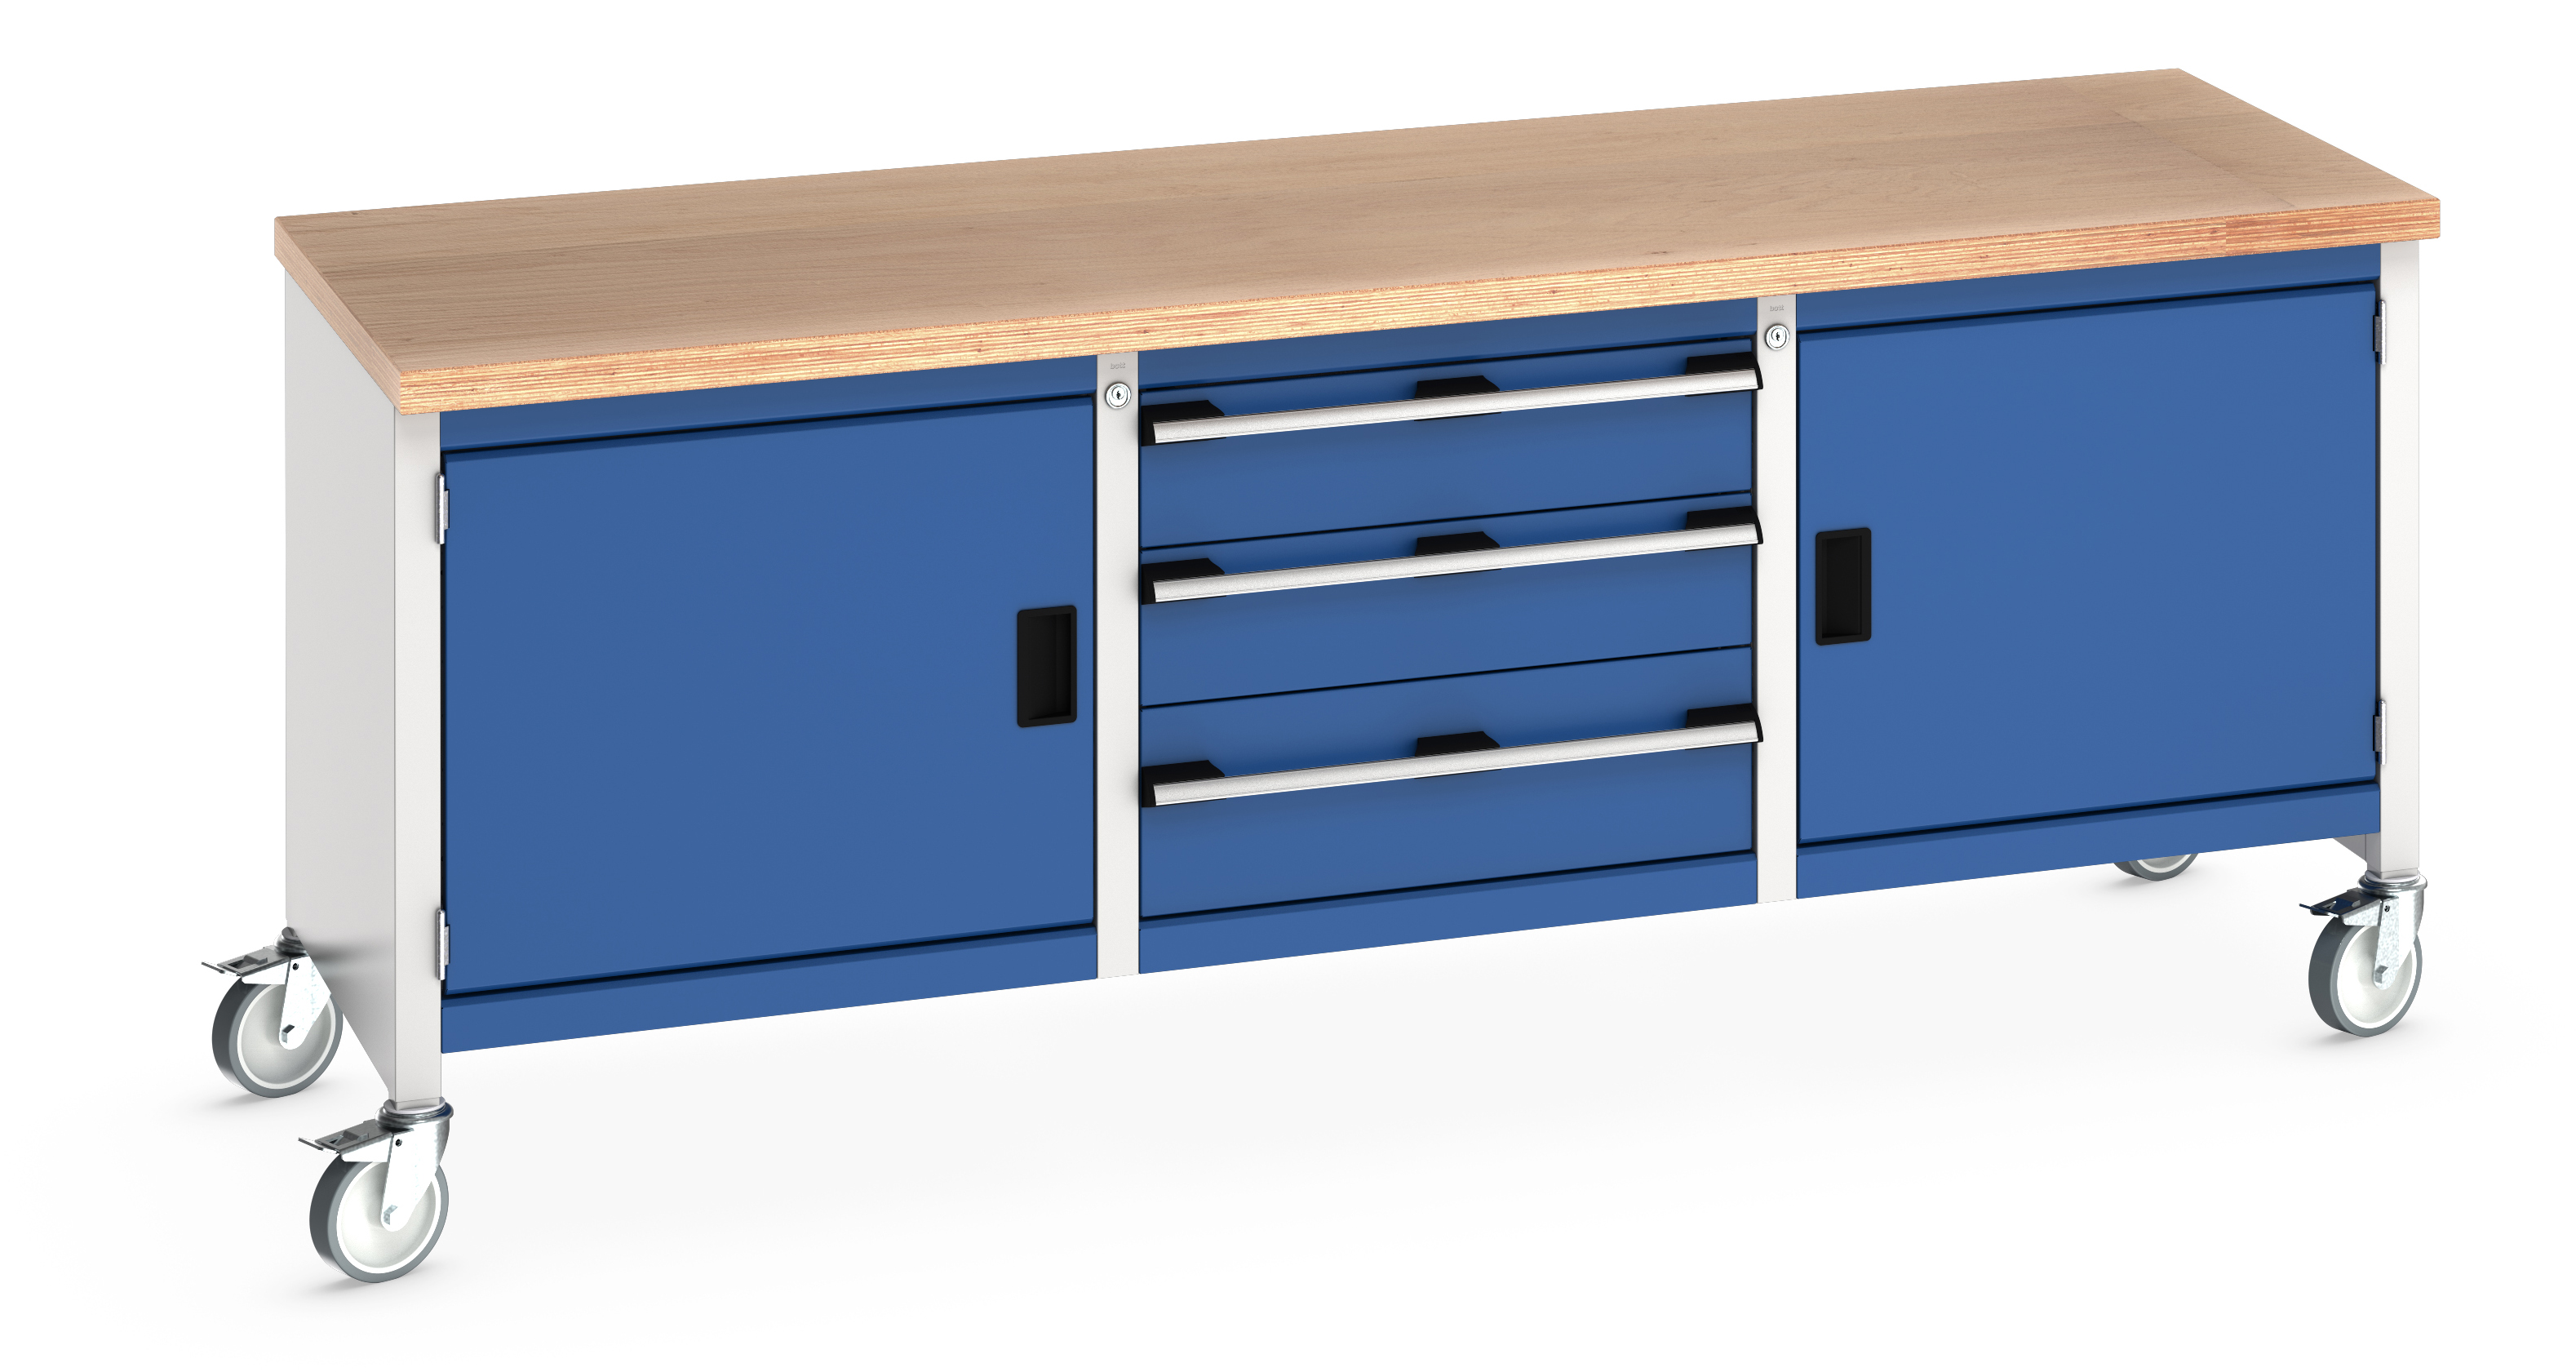 Bott Cubio Mobile Storage Bench With Full Cupboard / 3 Drawer Cabinet / Full Cupboard - 41002124.11V